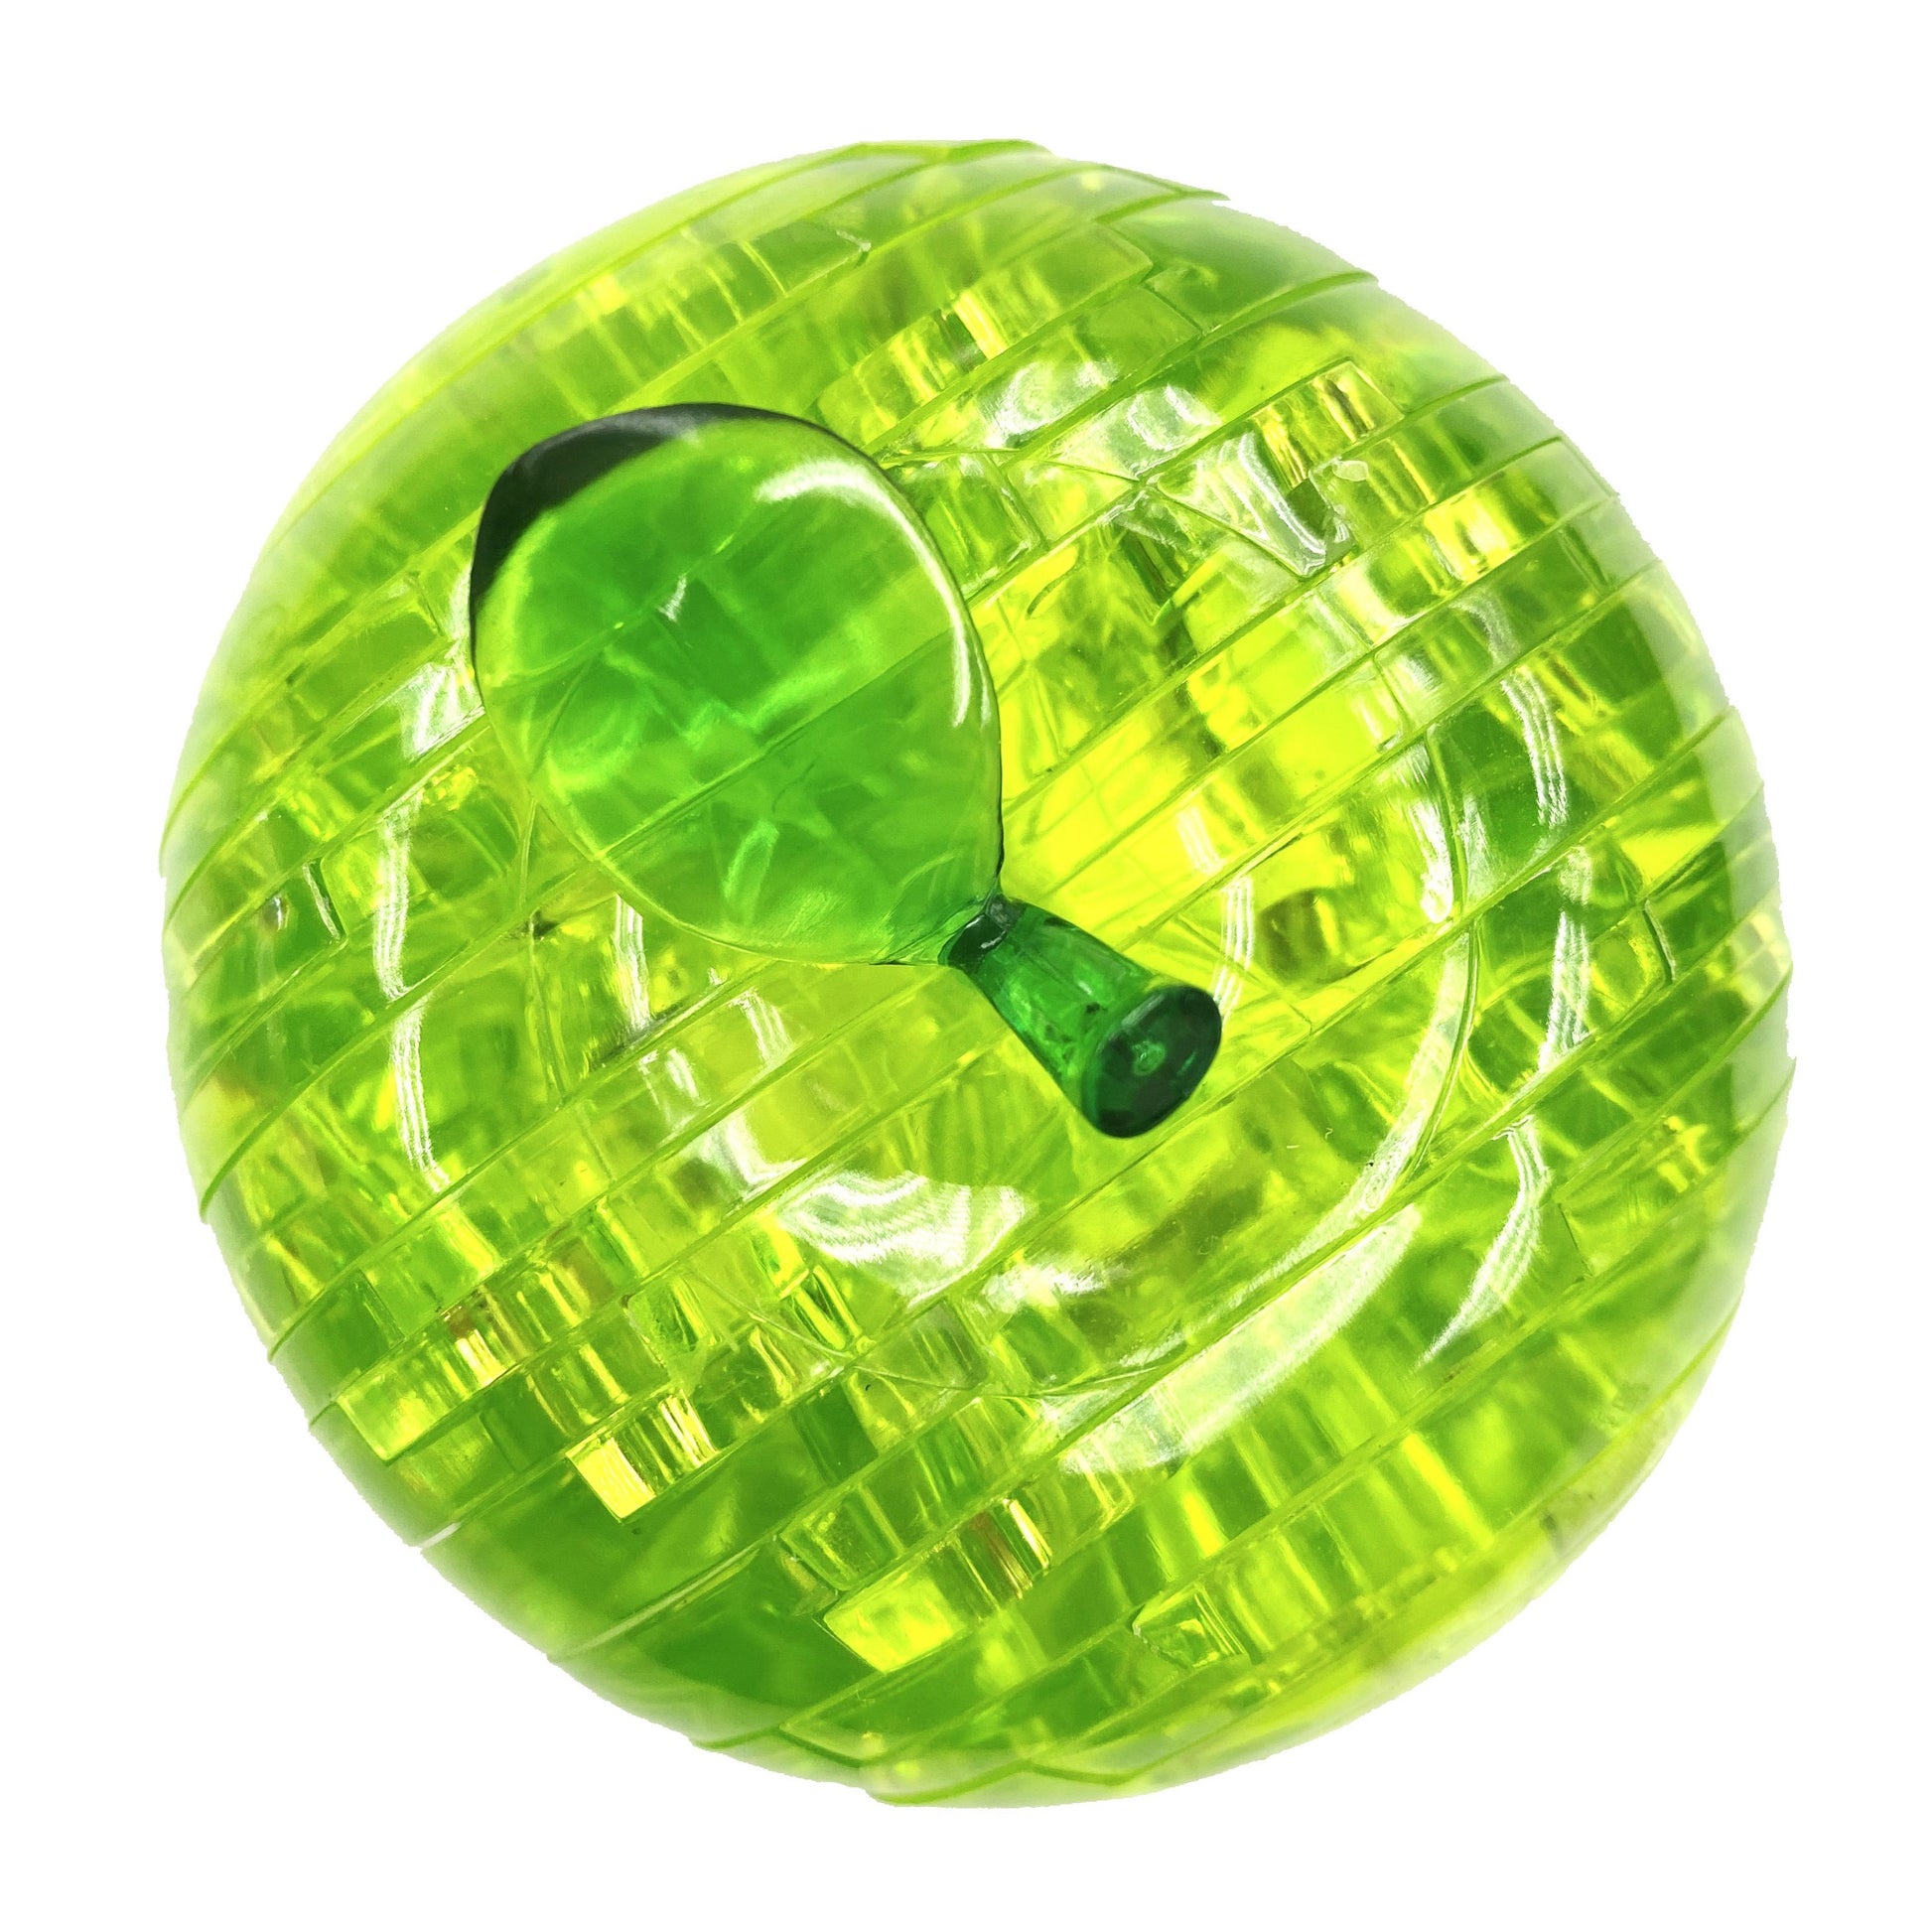 Apple (Green) Dimension: 75mm x 75mm x 75mm Color: Green Number of Pieces: 44 Weight: 220g